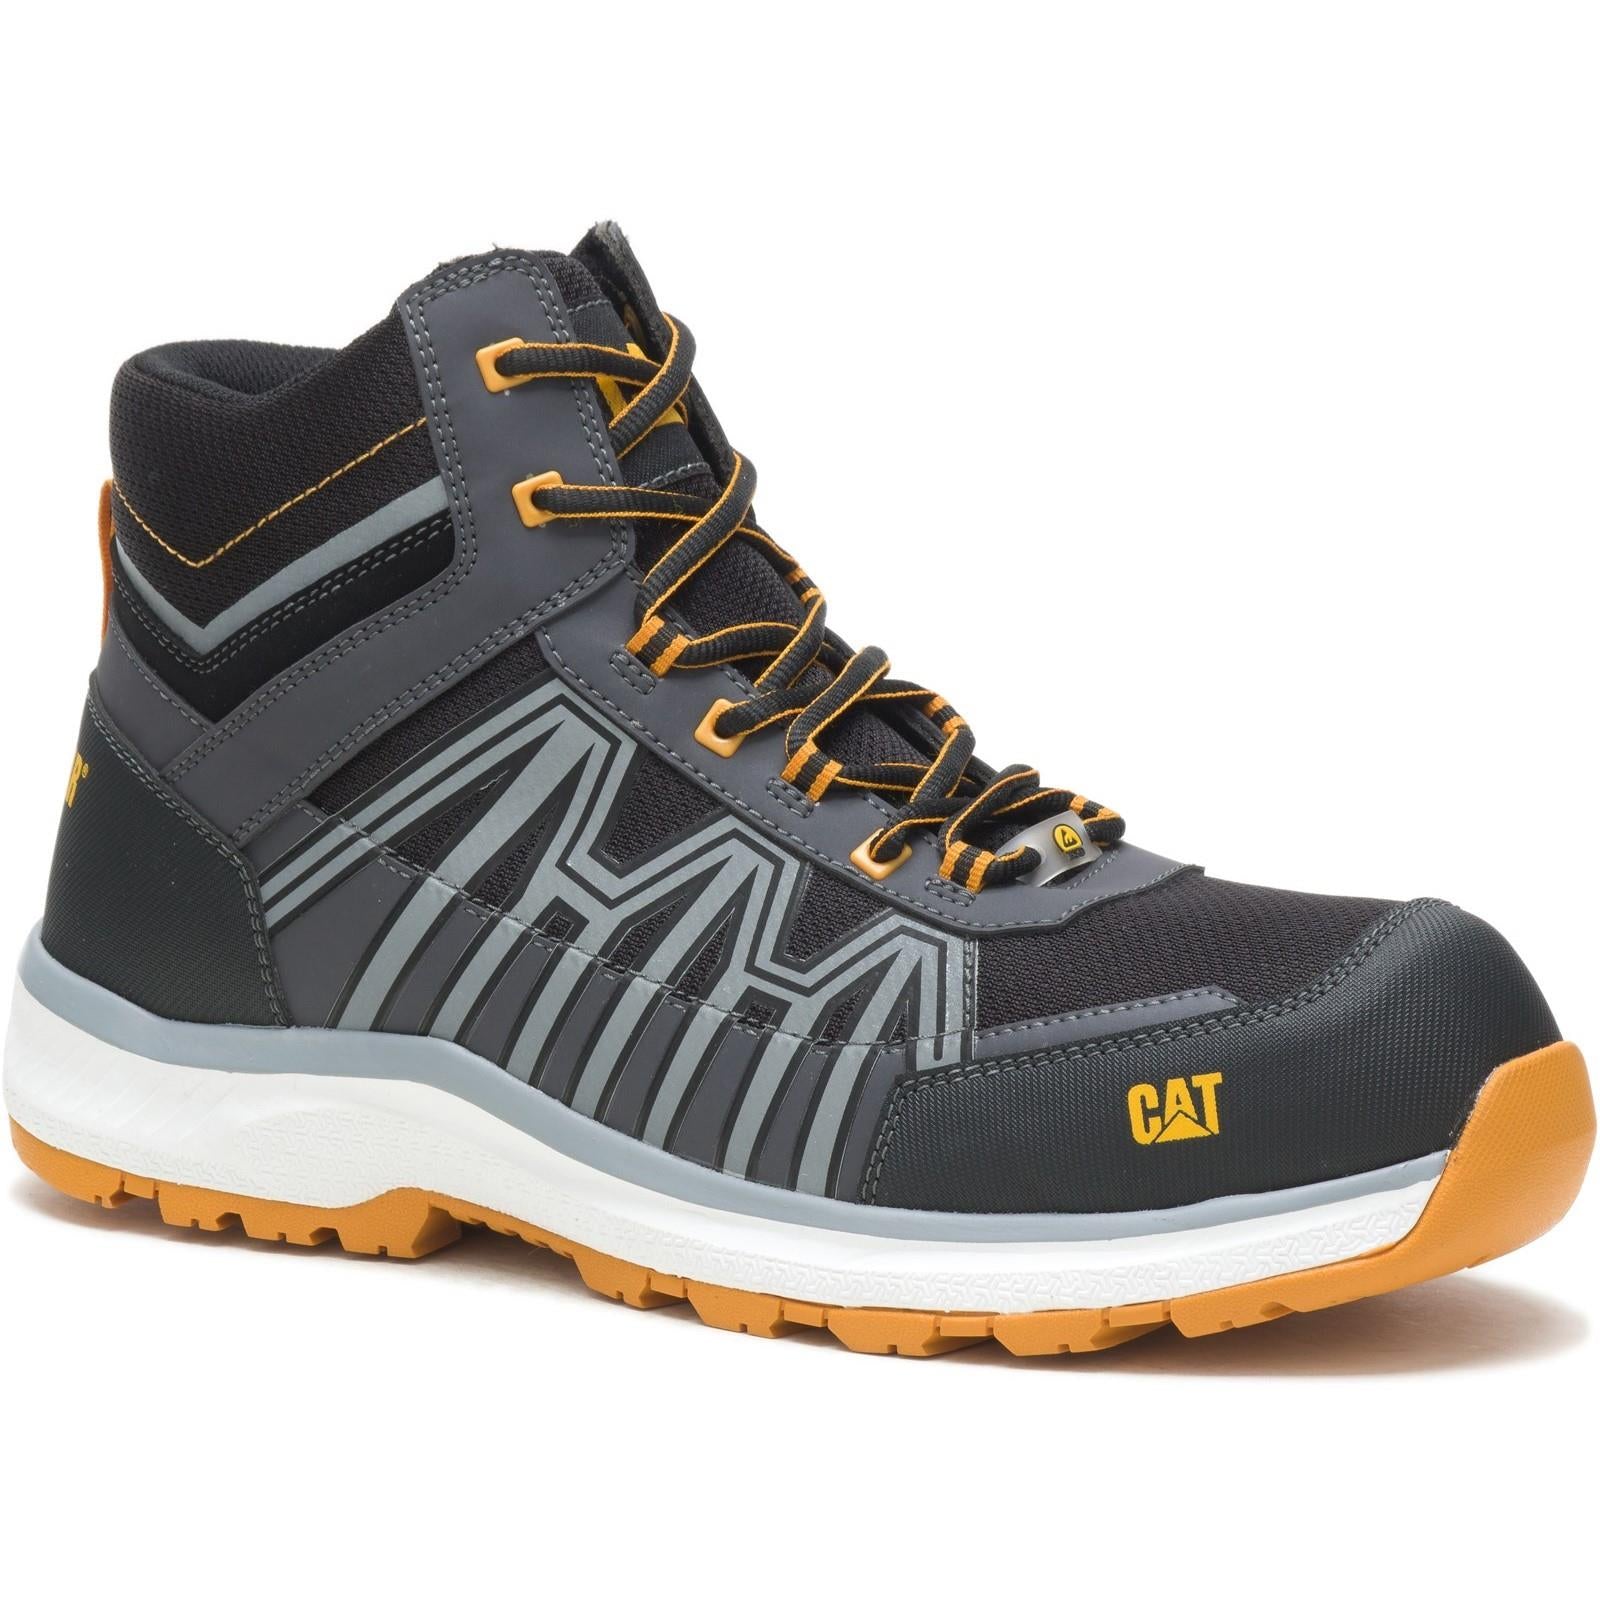 Caterpillar CAT Charge Hiker S3 black/orange composite work safety boots